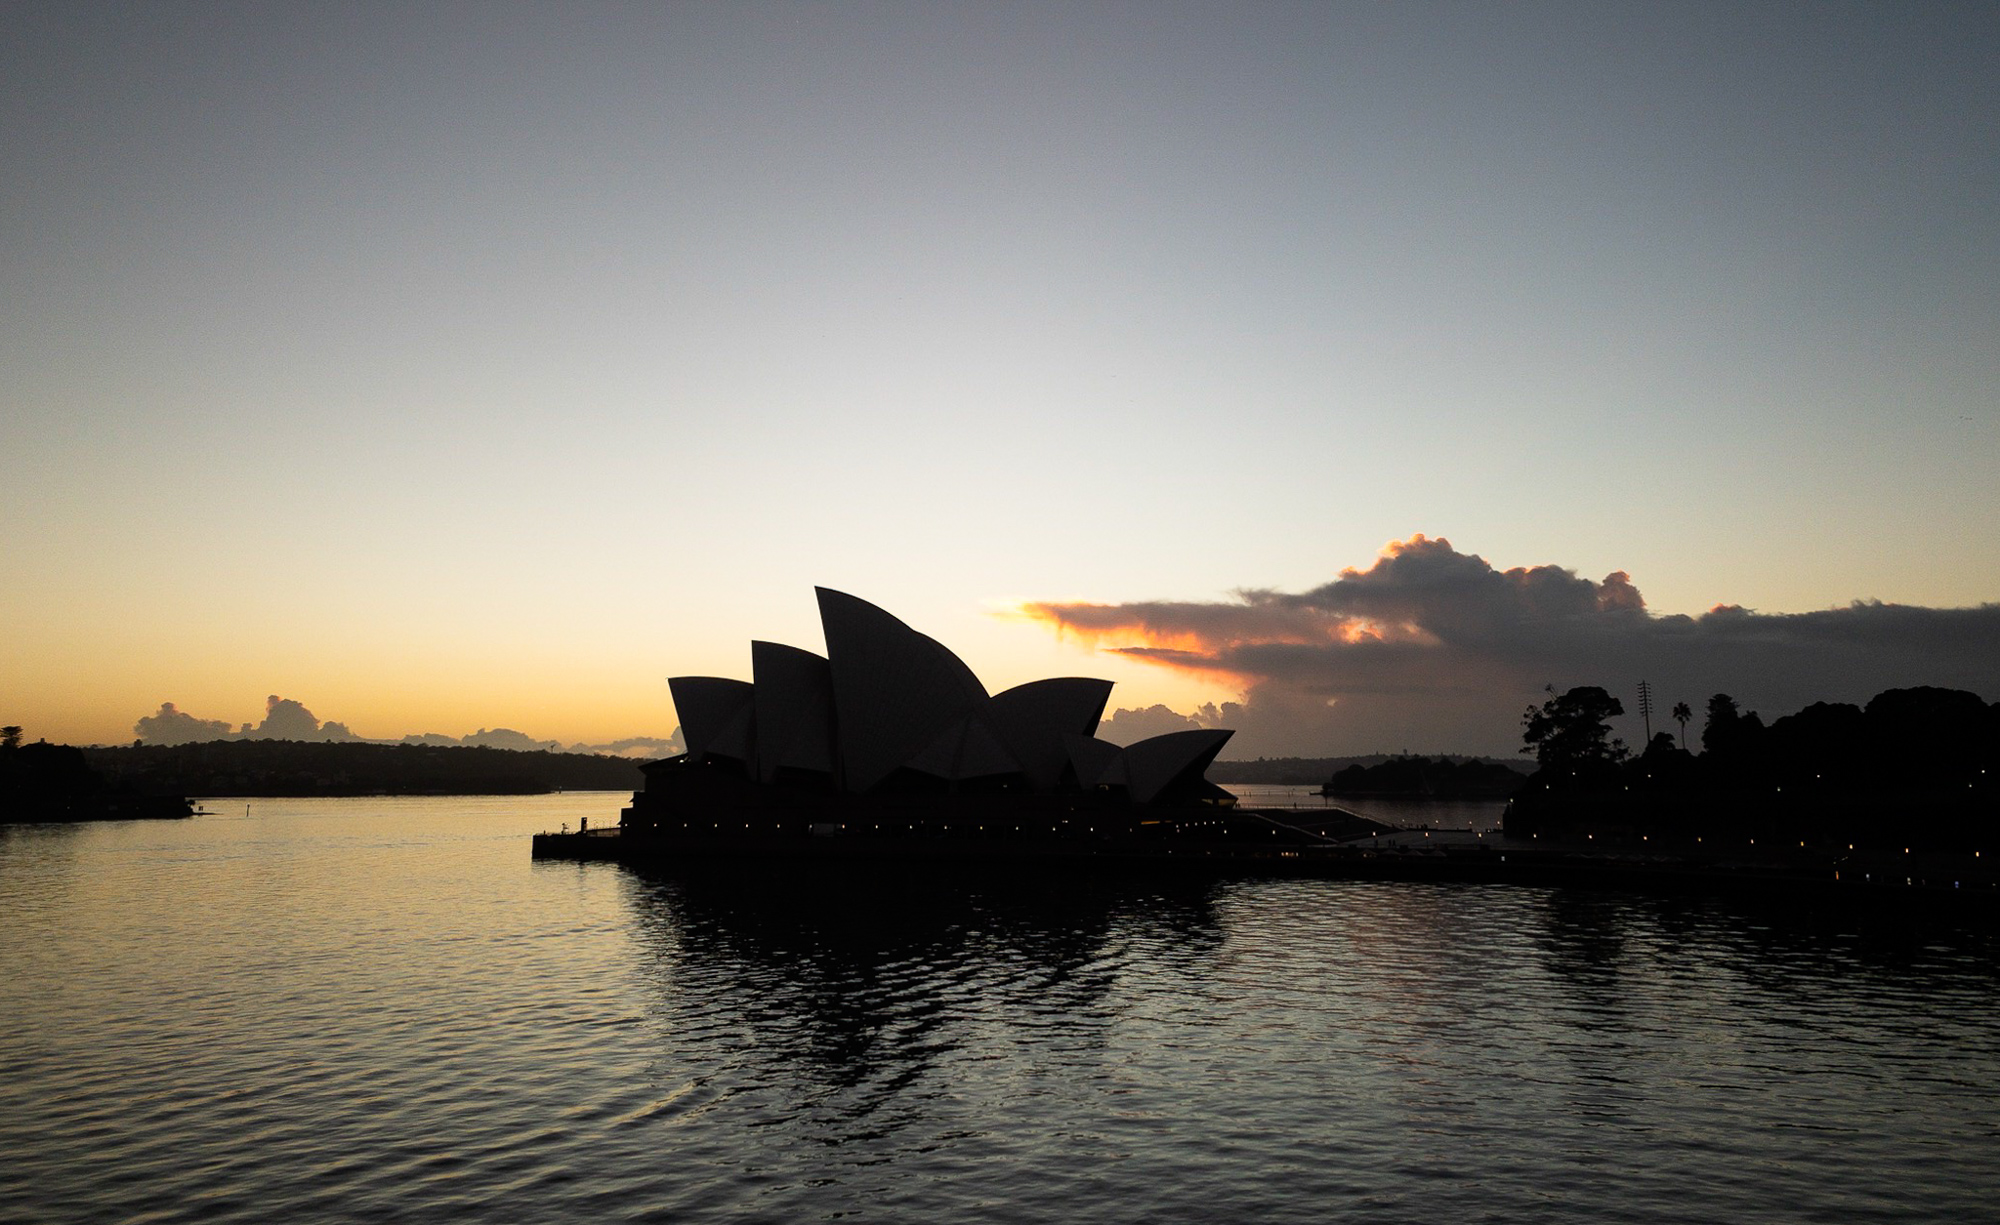 The iconic Sydney Opera House at dawn. Photo taken from the balcony of our cabin on the MS Noordam.